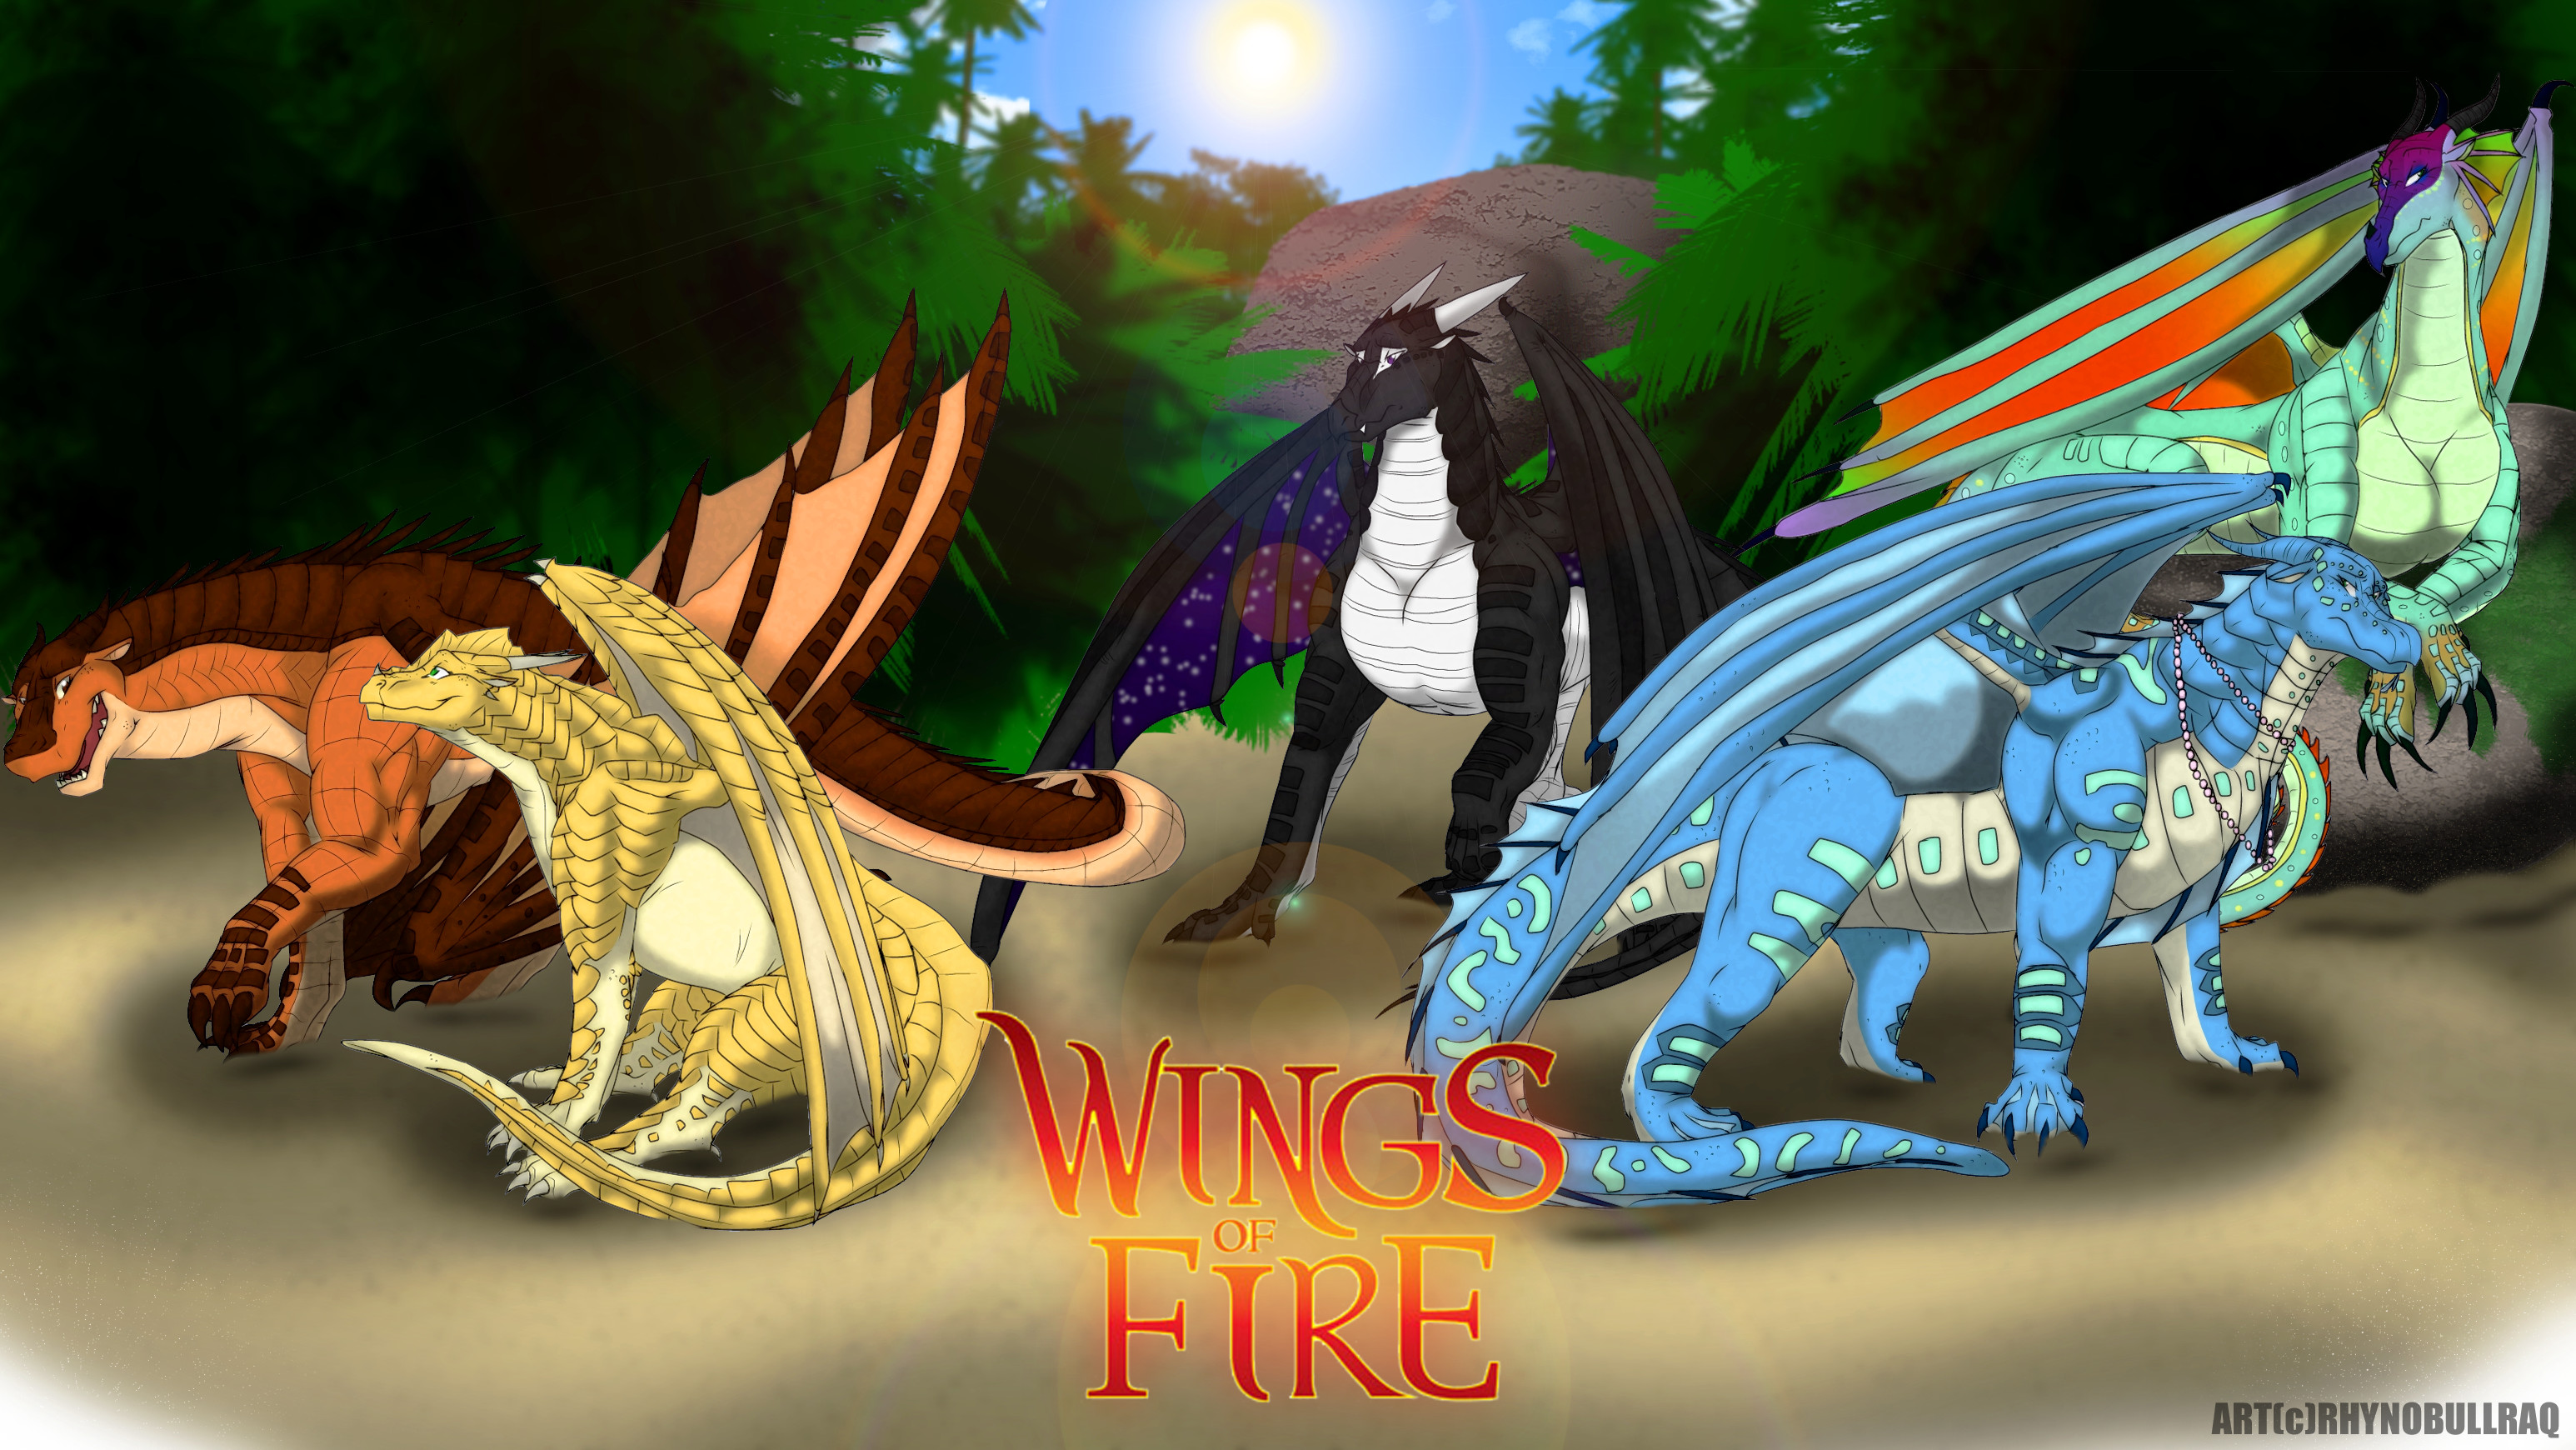 Wings of Fire Wallpaper (79+ images)